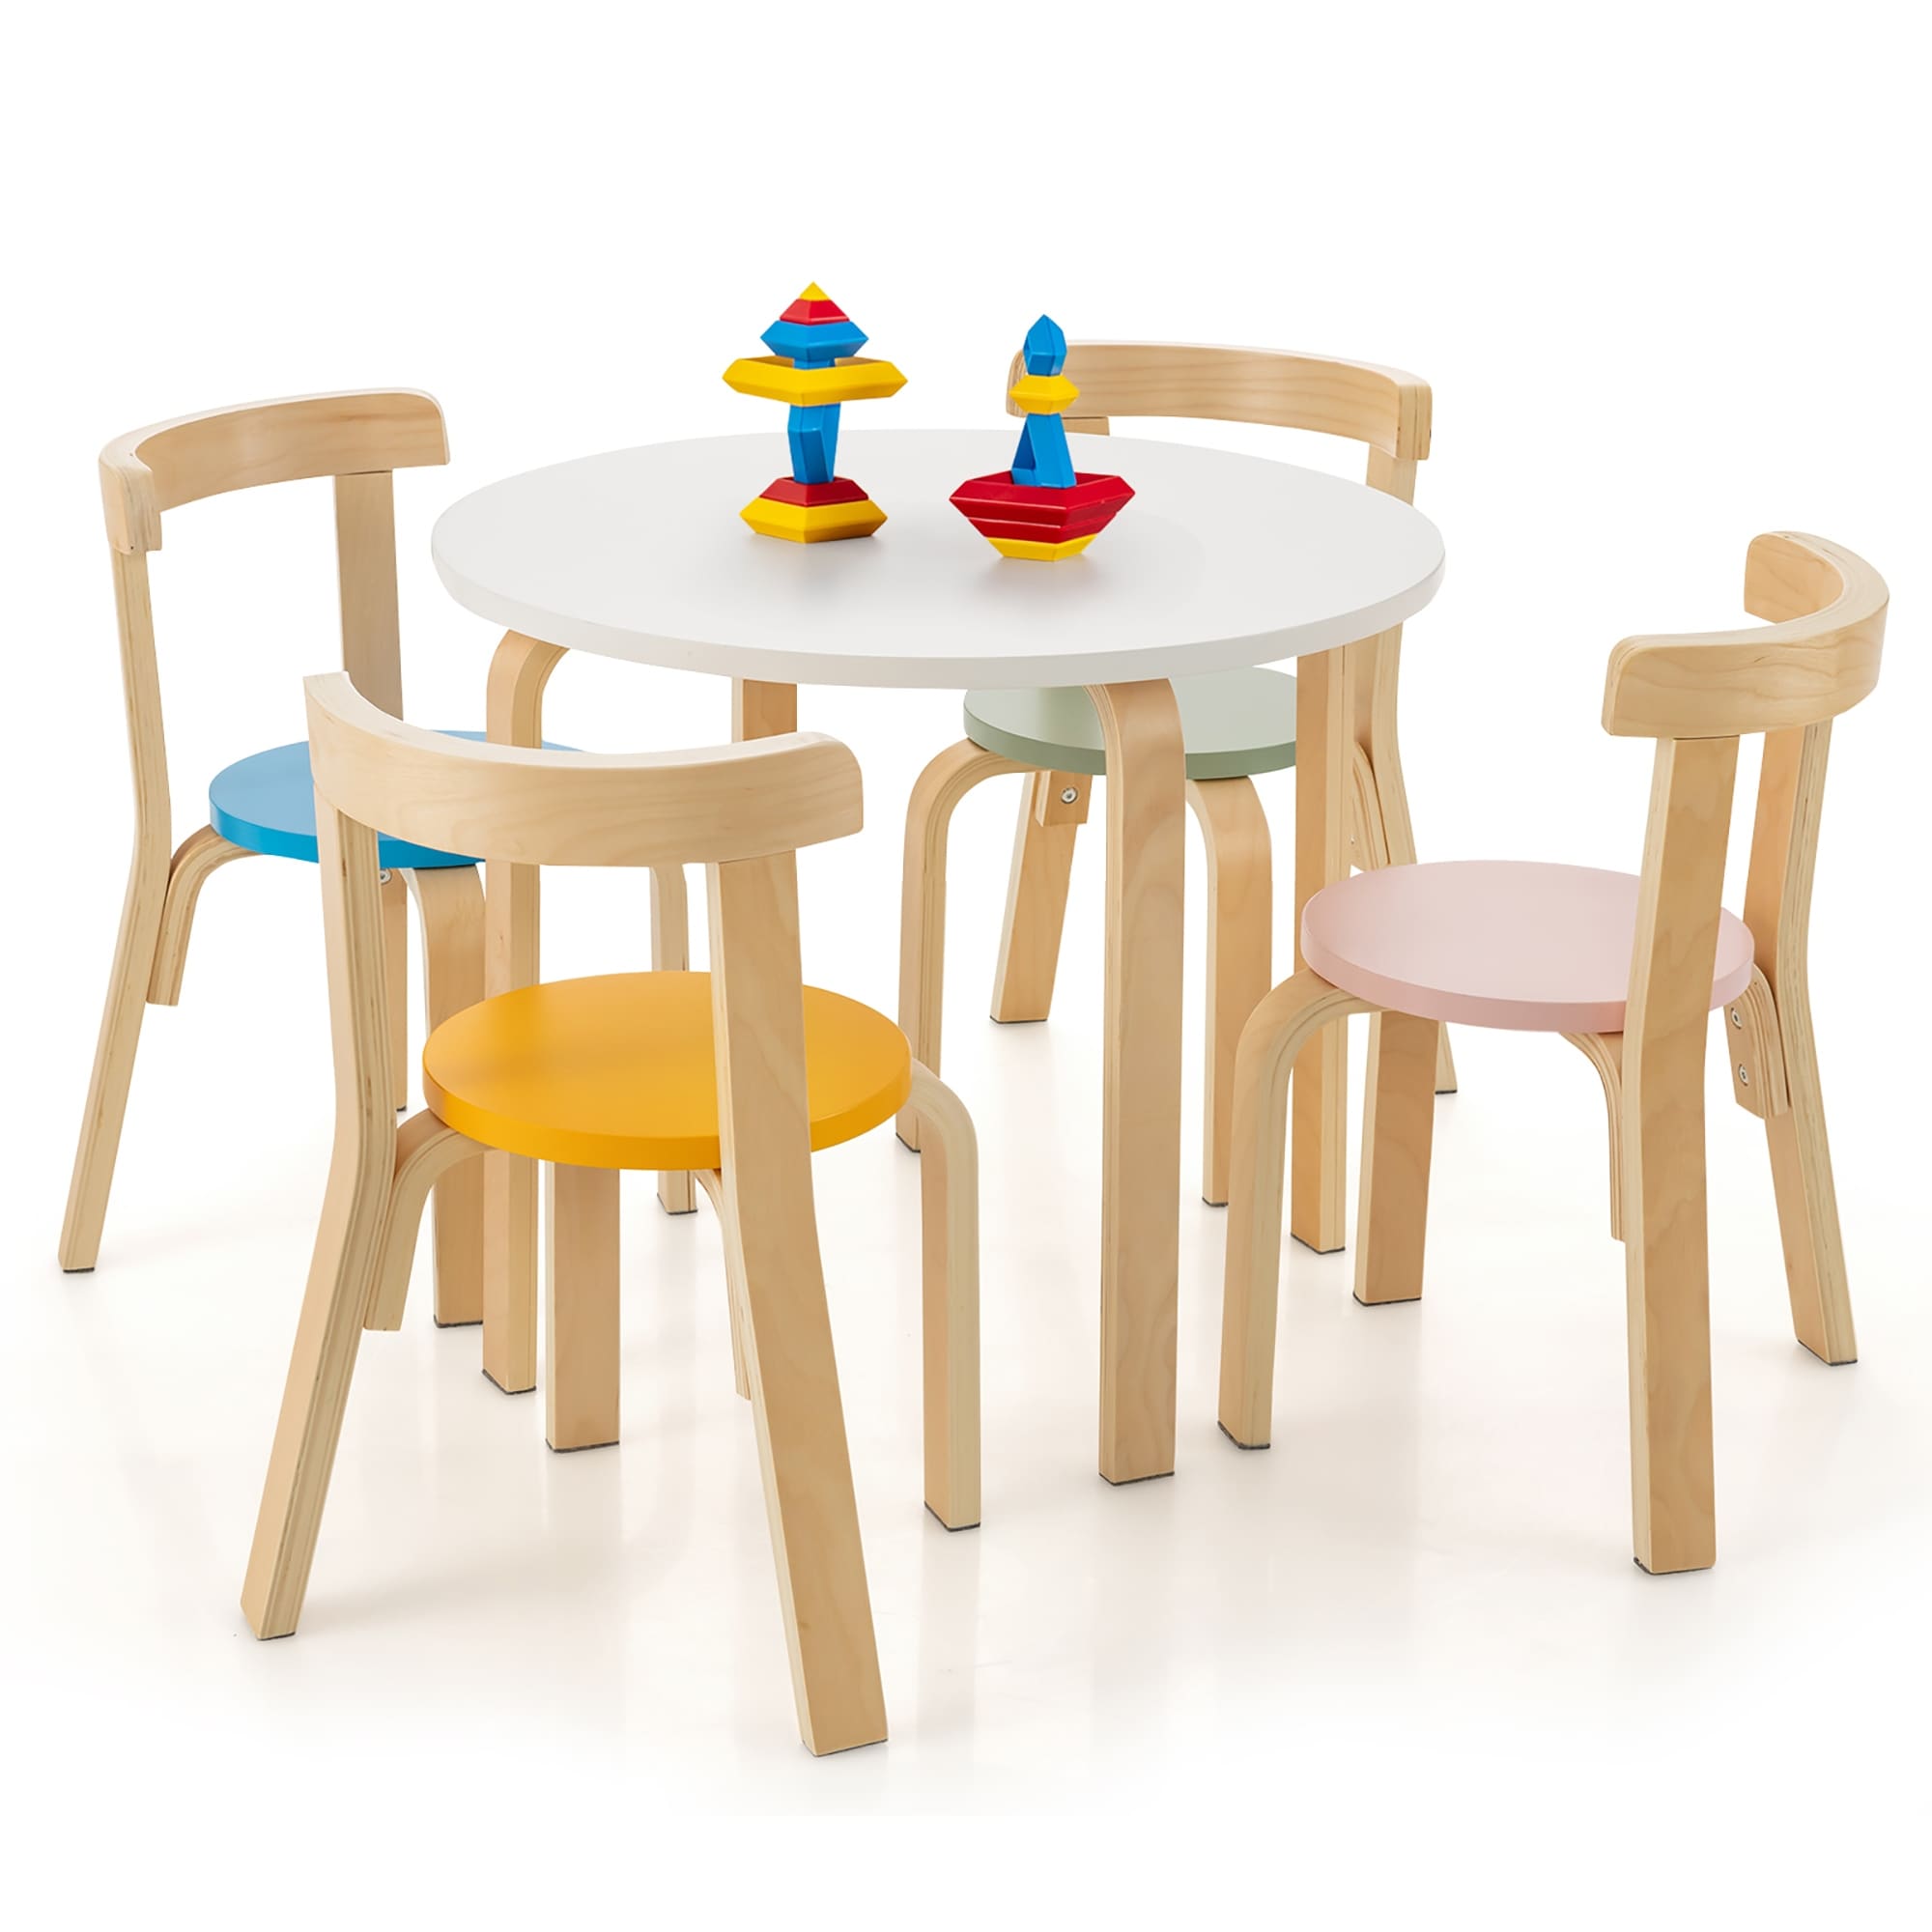 https://ak1.ostkcdn.com/images/products/is/images/direct/4a2e818672fd651159aee595915bec2e65172ba0/Gymax-5-Piece-Kids-Wooden-Curved-Back-Activity-Table-%26-Chair-Set-w-Toy.jpg